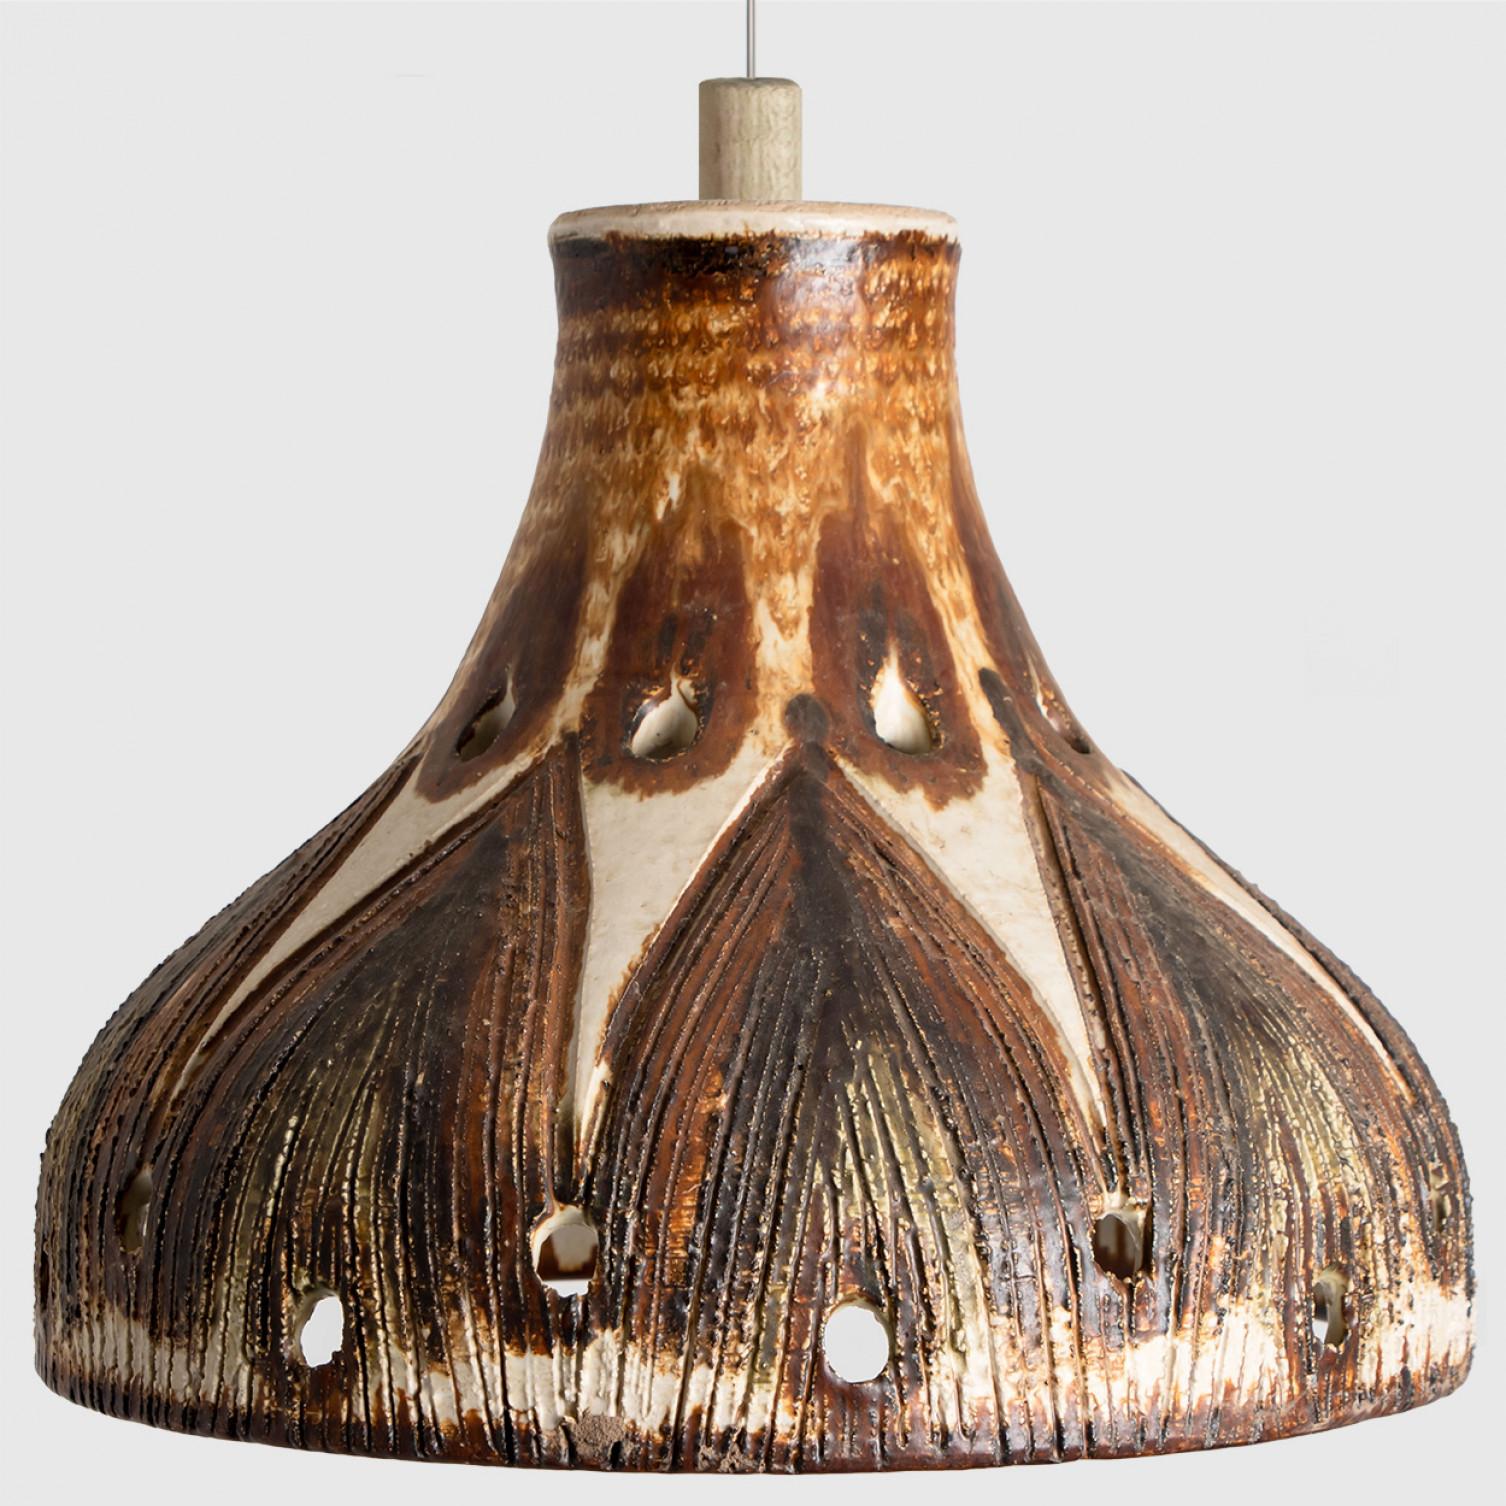 Stunning round hanging lamp with an unusual shape, made with rich brown colored ceramics, manufactured in the 1970s in Denmark. We also have a multitude of unique colored ceramic light sets and arrangements, all available on the frontstore.